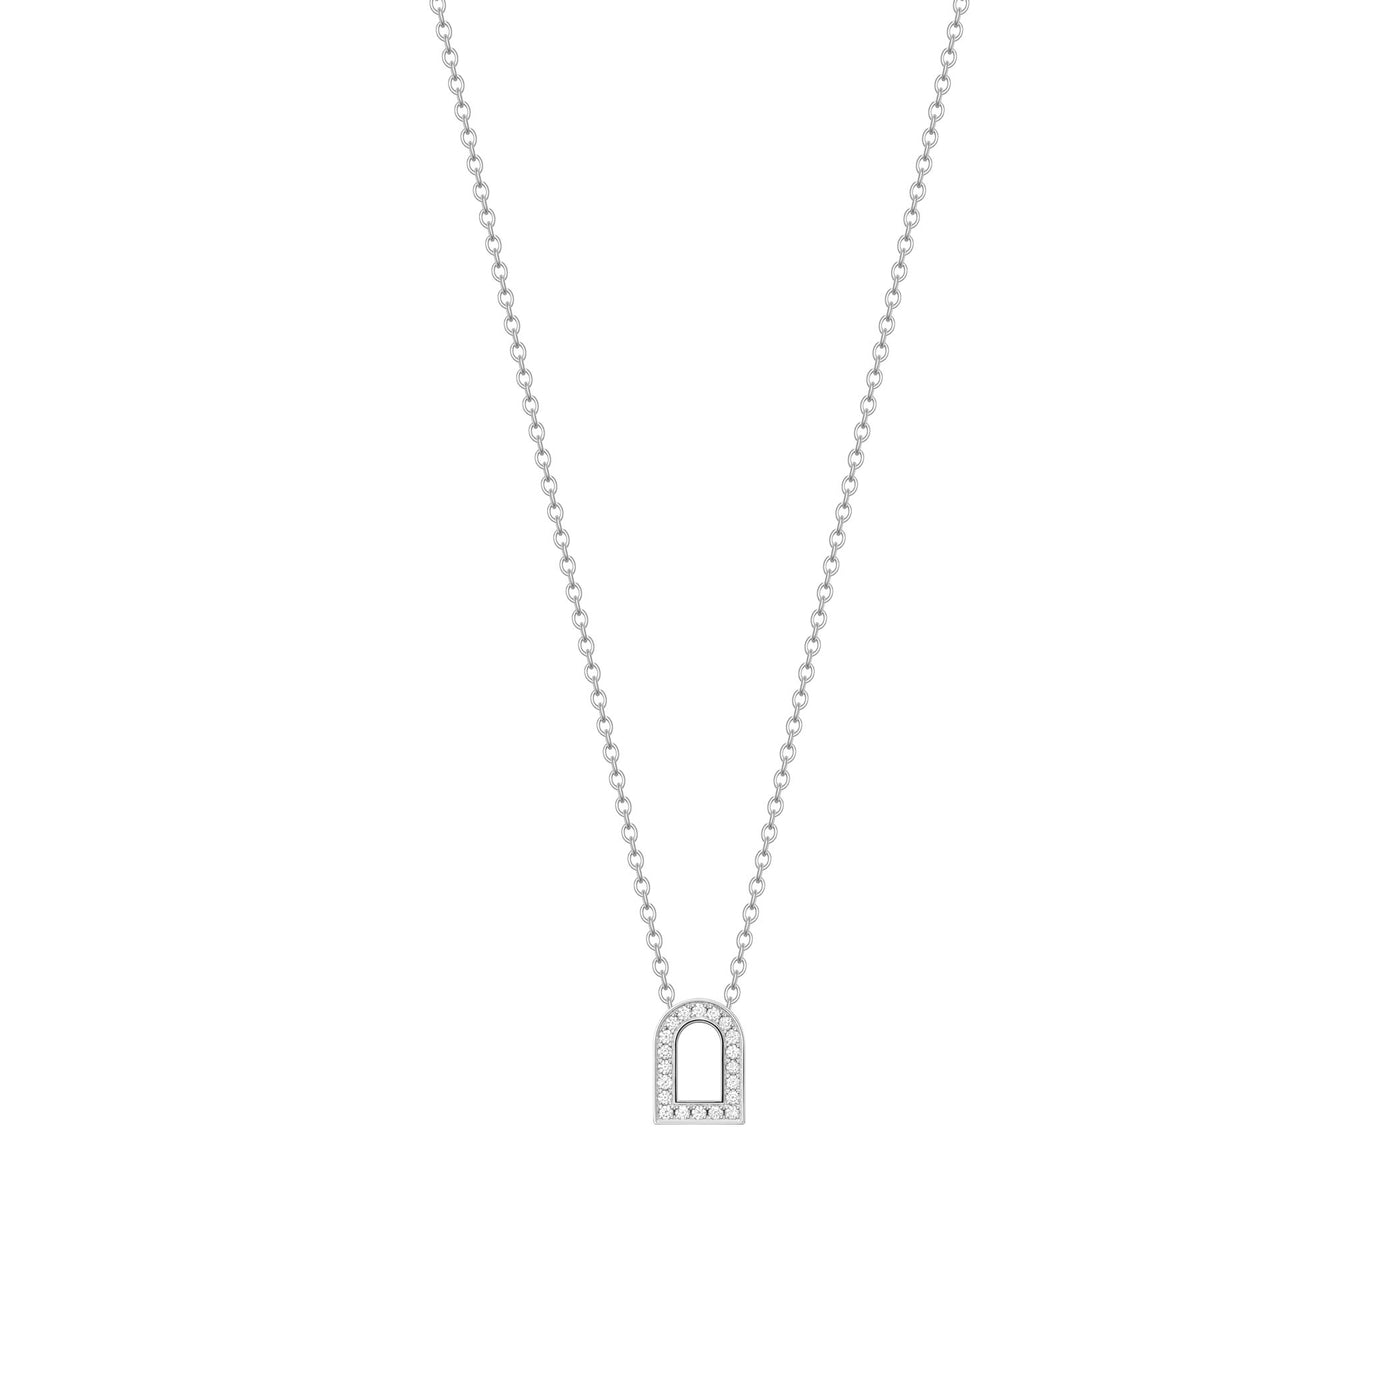 L'Arc Voyage Charm PM Chain Necklace, 18k White Gold with Galerie Diamonds - DAVIDOR